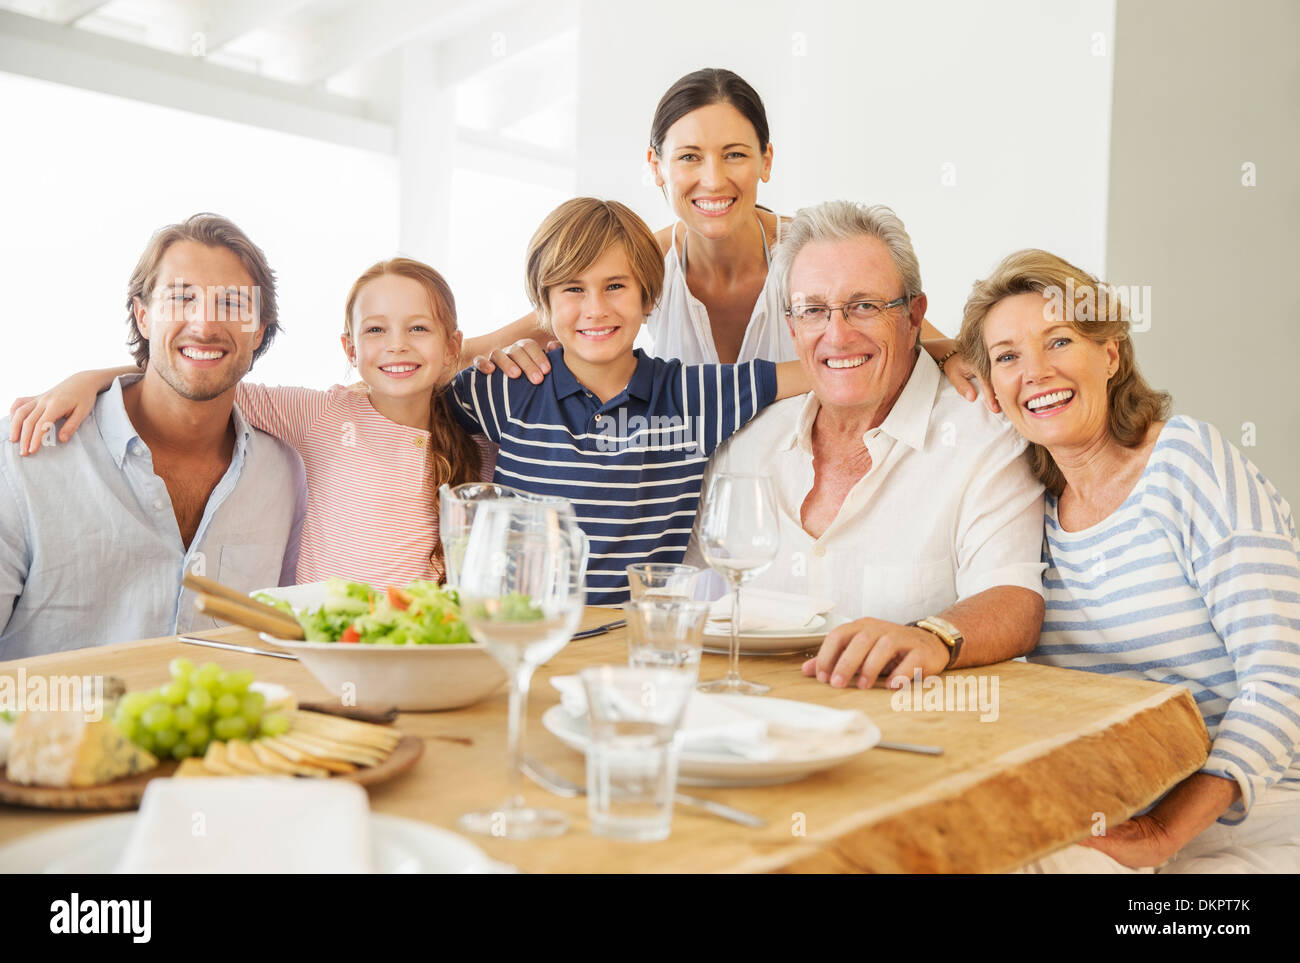 Multi-generation family smiling together at table Banque D'Images